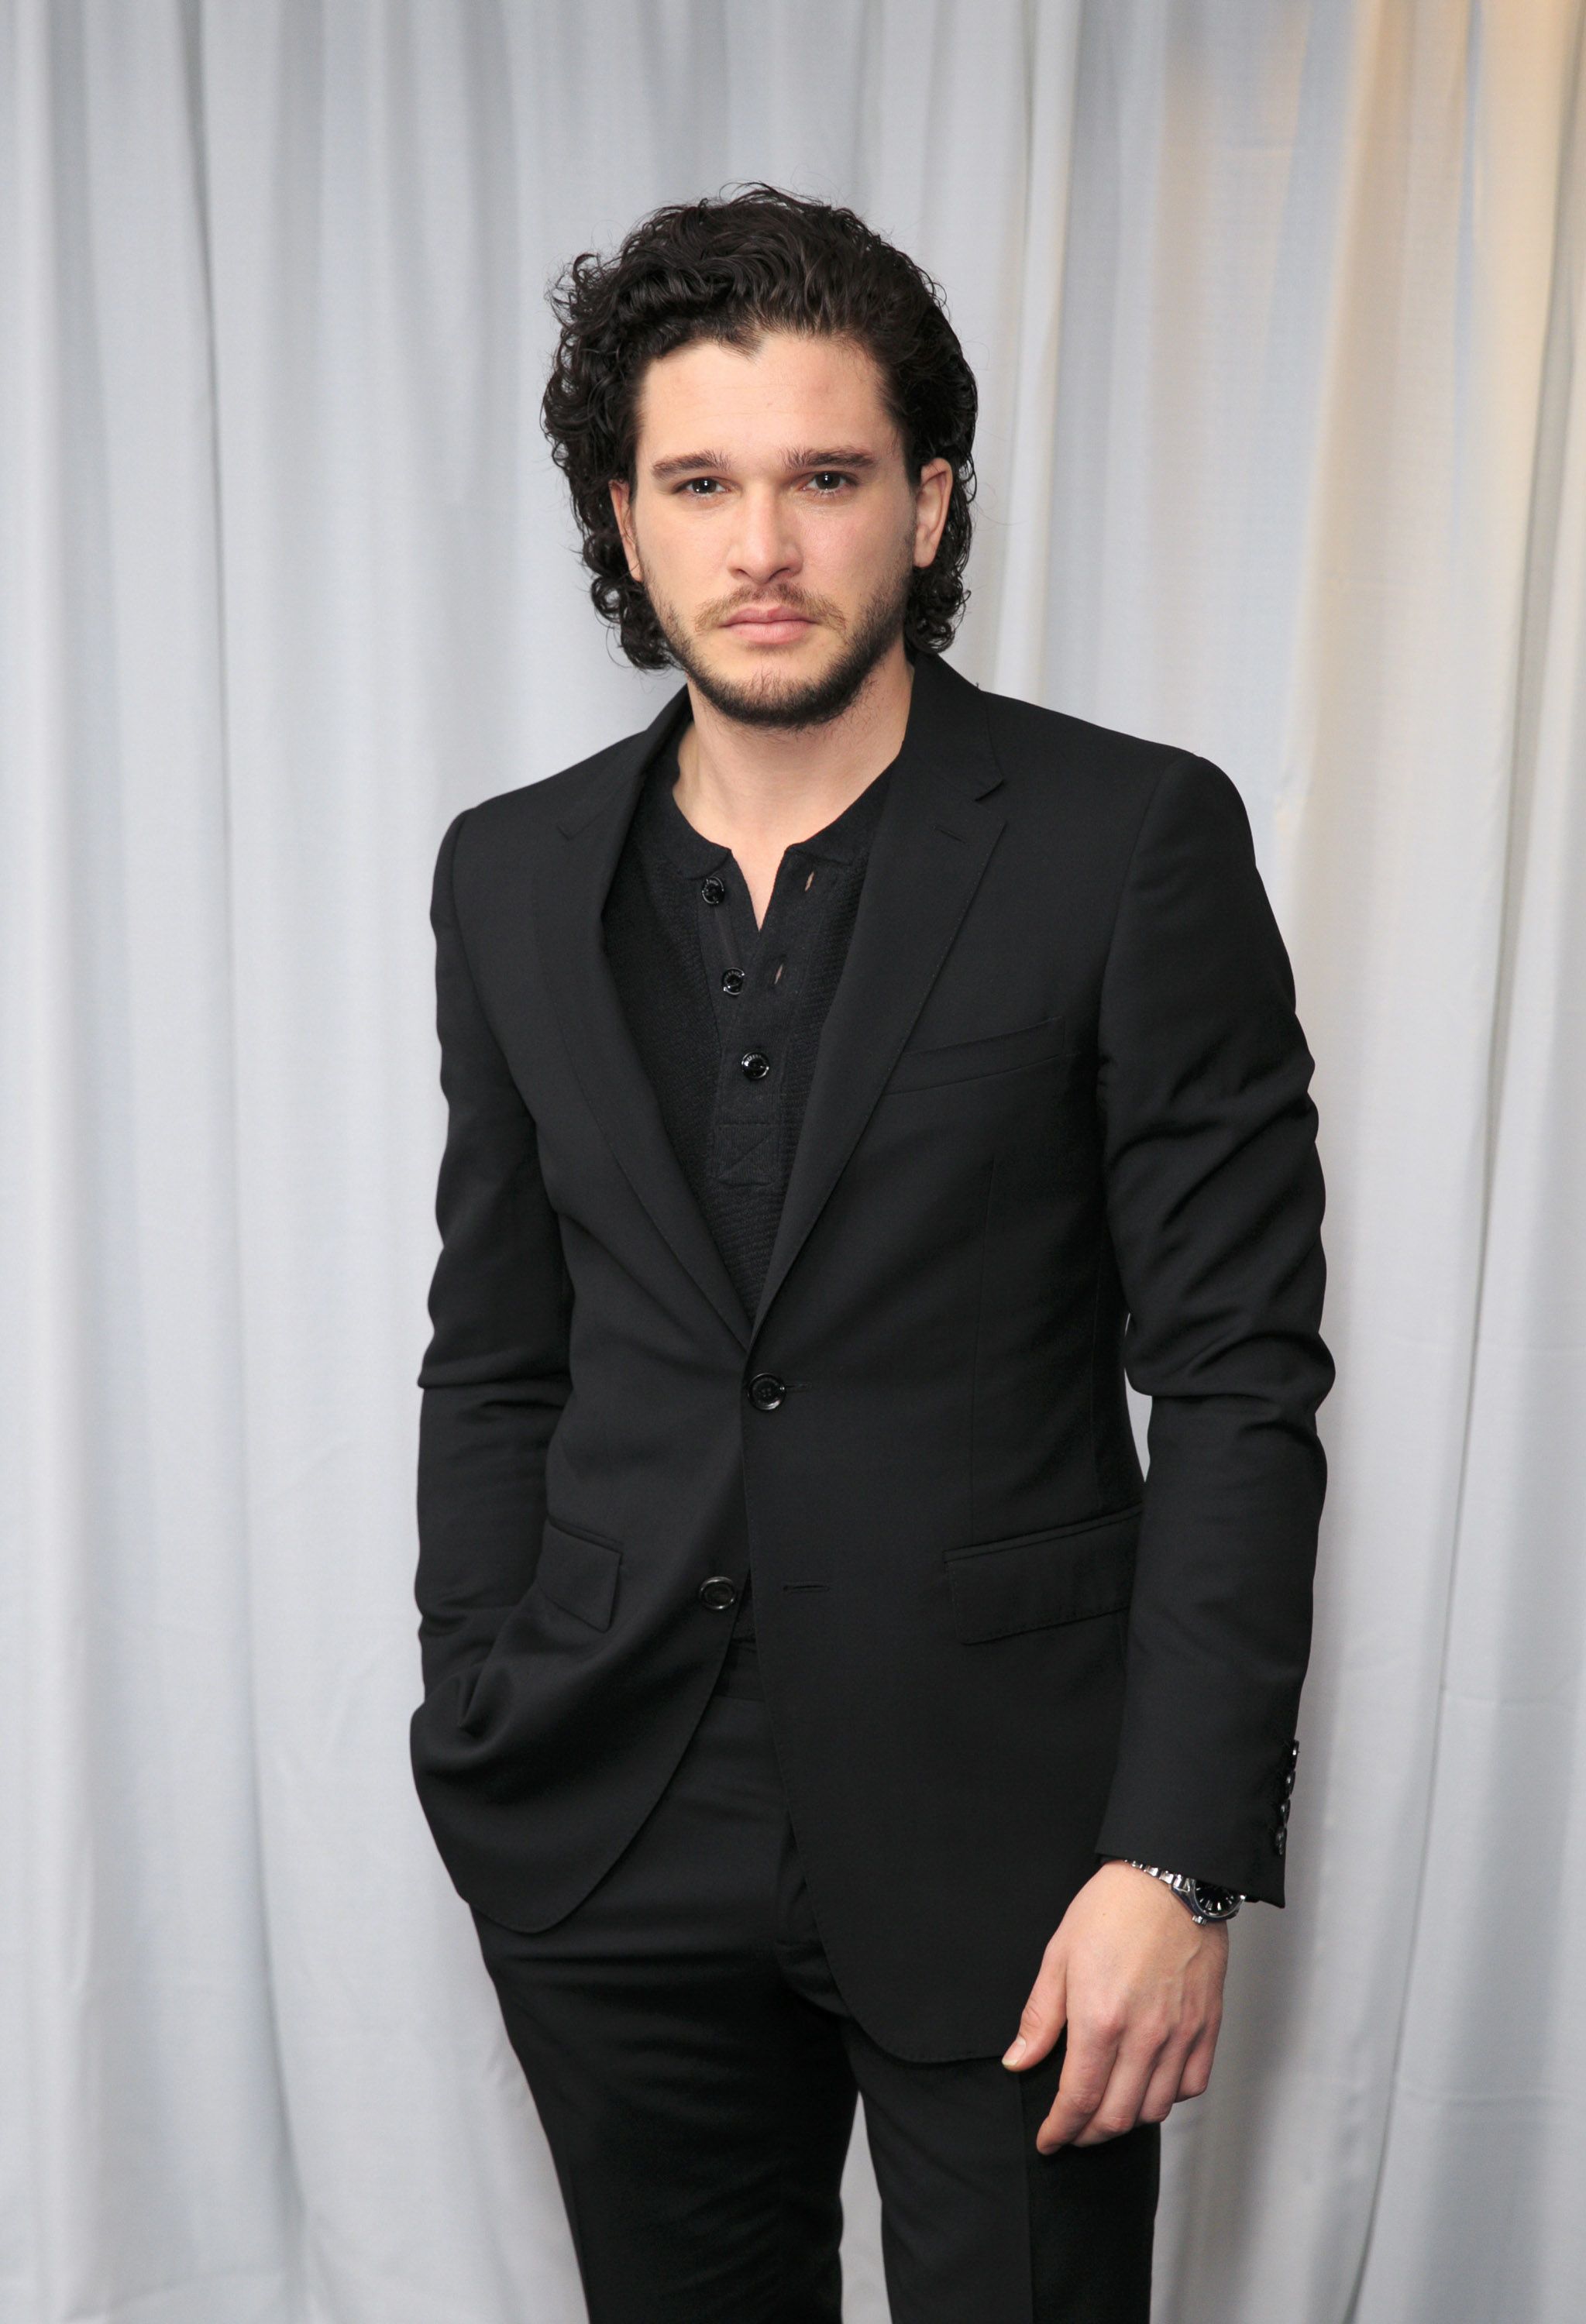 Kit Harington debuts his new look, without a beard